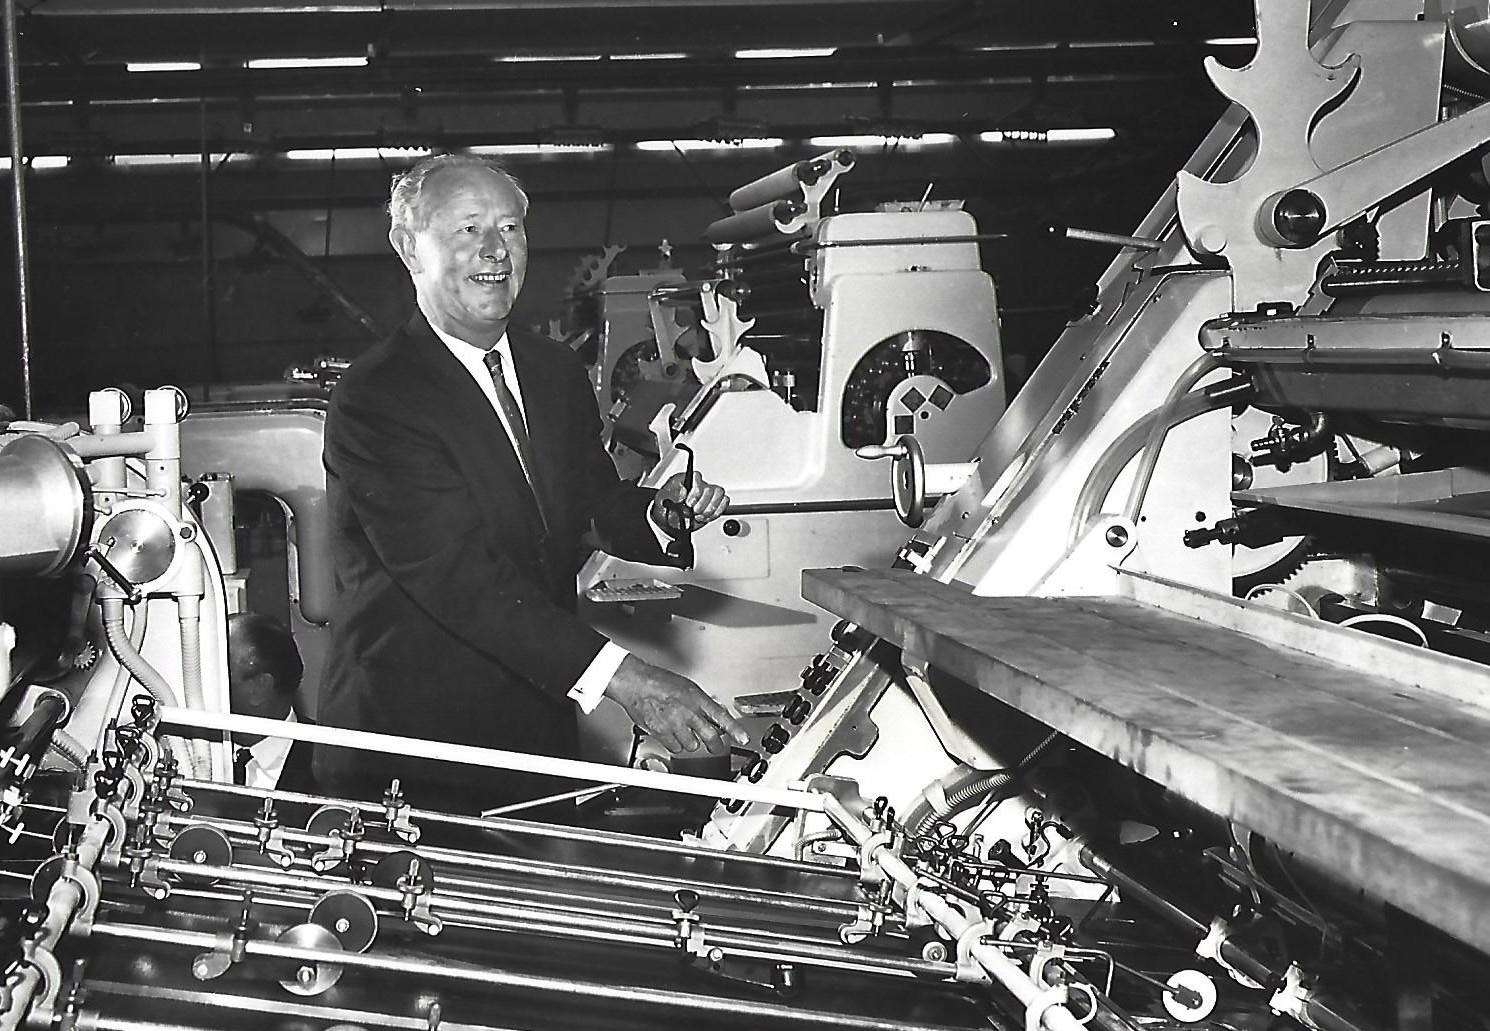 Richard Hearne starts a new Roland press at Passmore's printing factory in Tovil in 1967